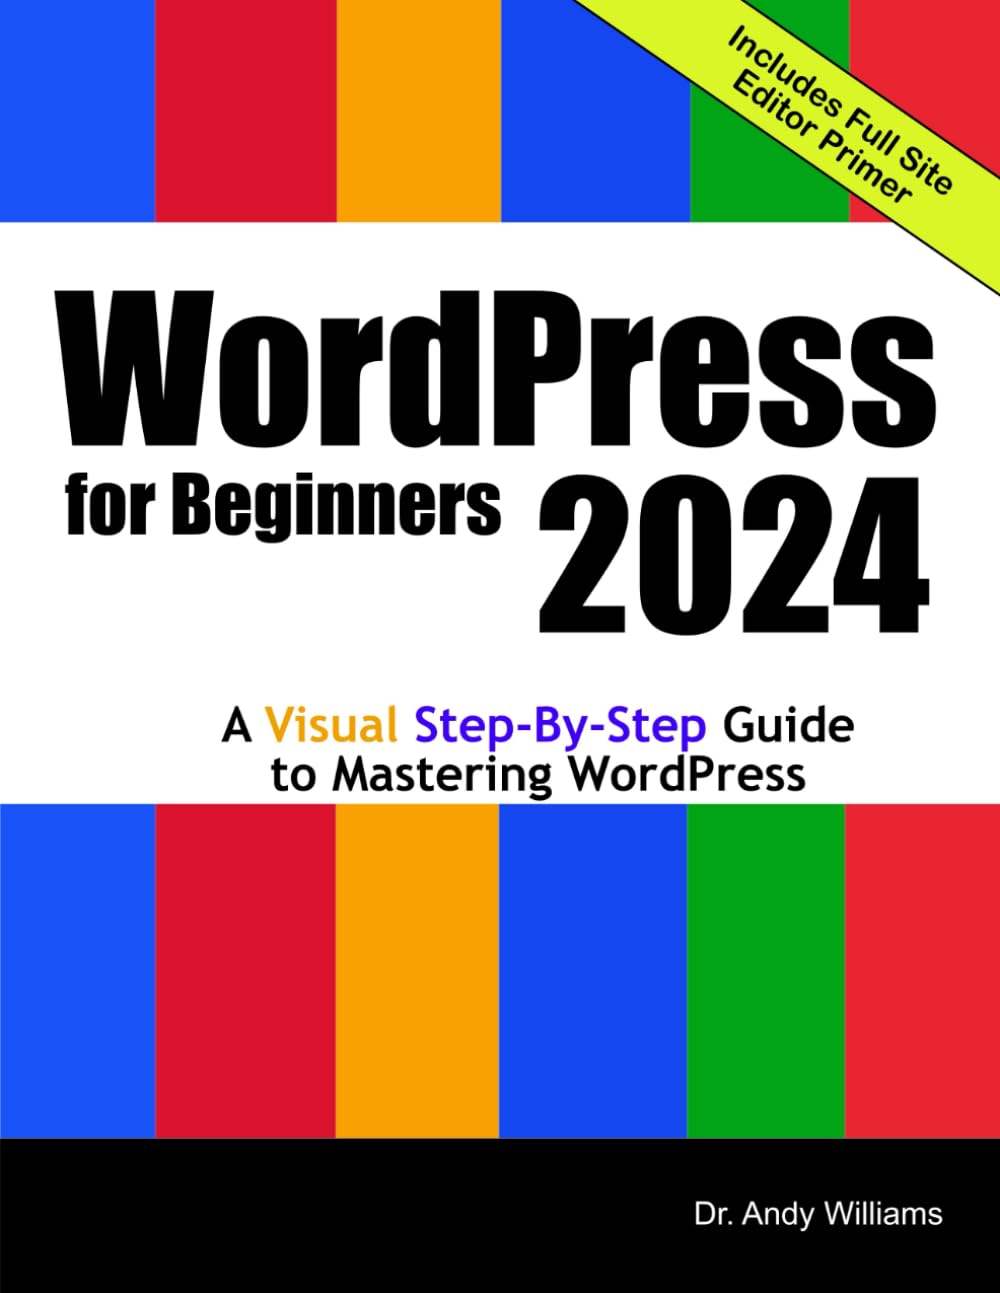 WordPress for Beginners 2024: A Visual Step-by-Step Guide to Mastering WordPress (Webmaster Series)